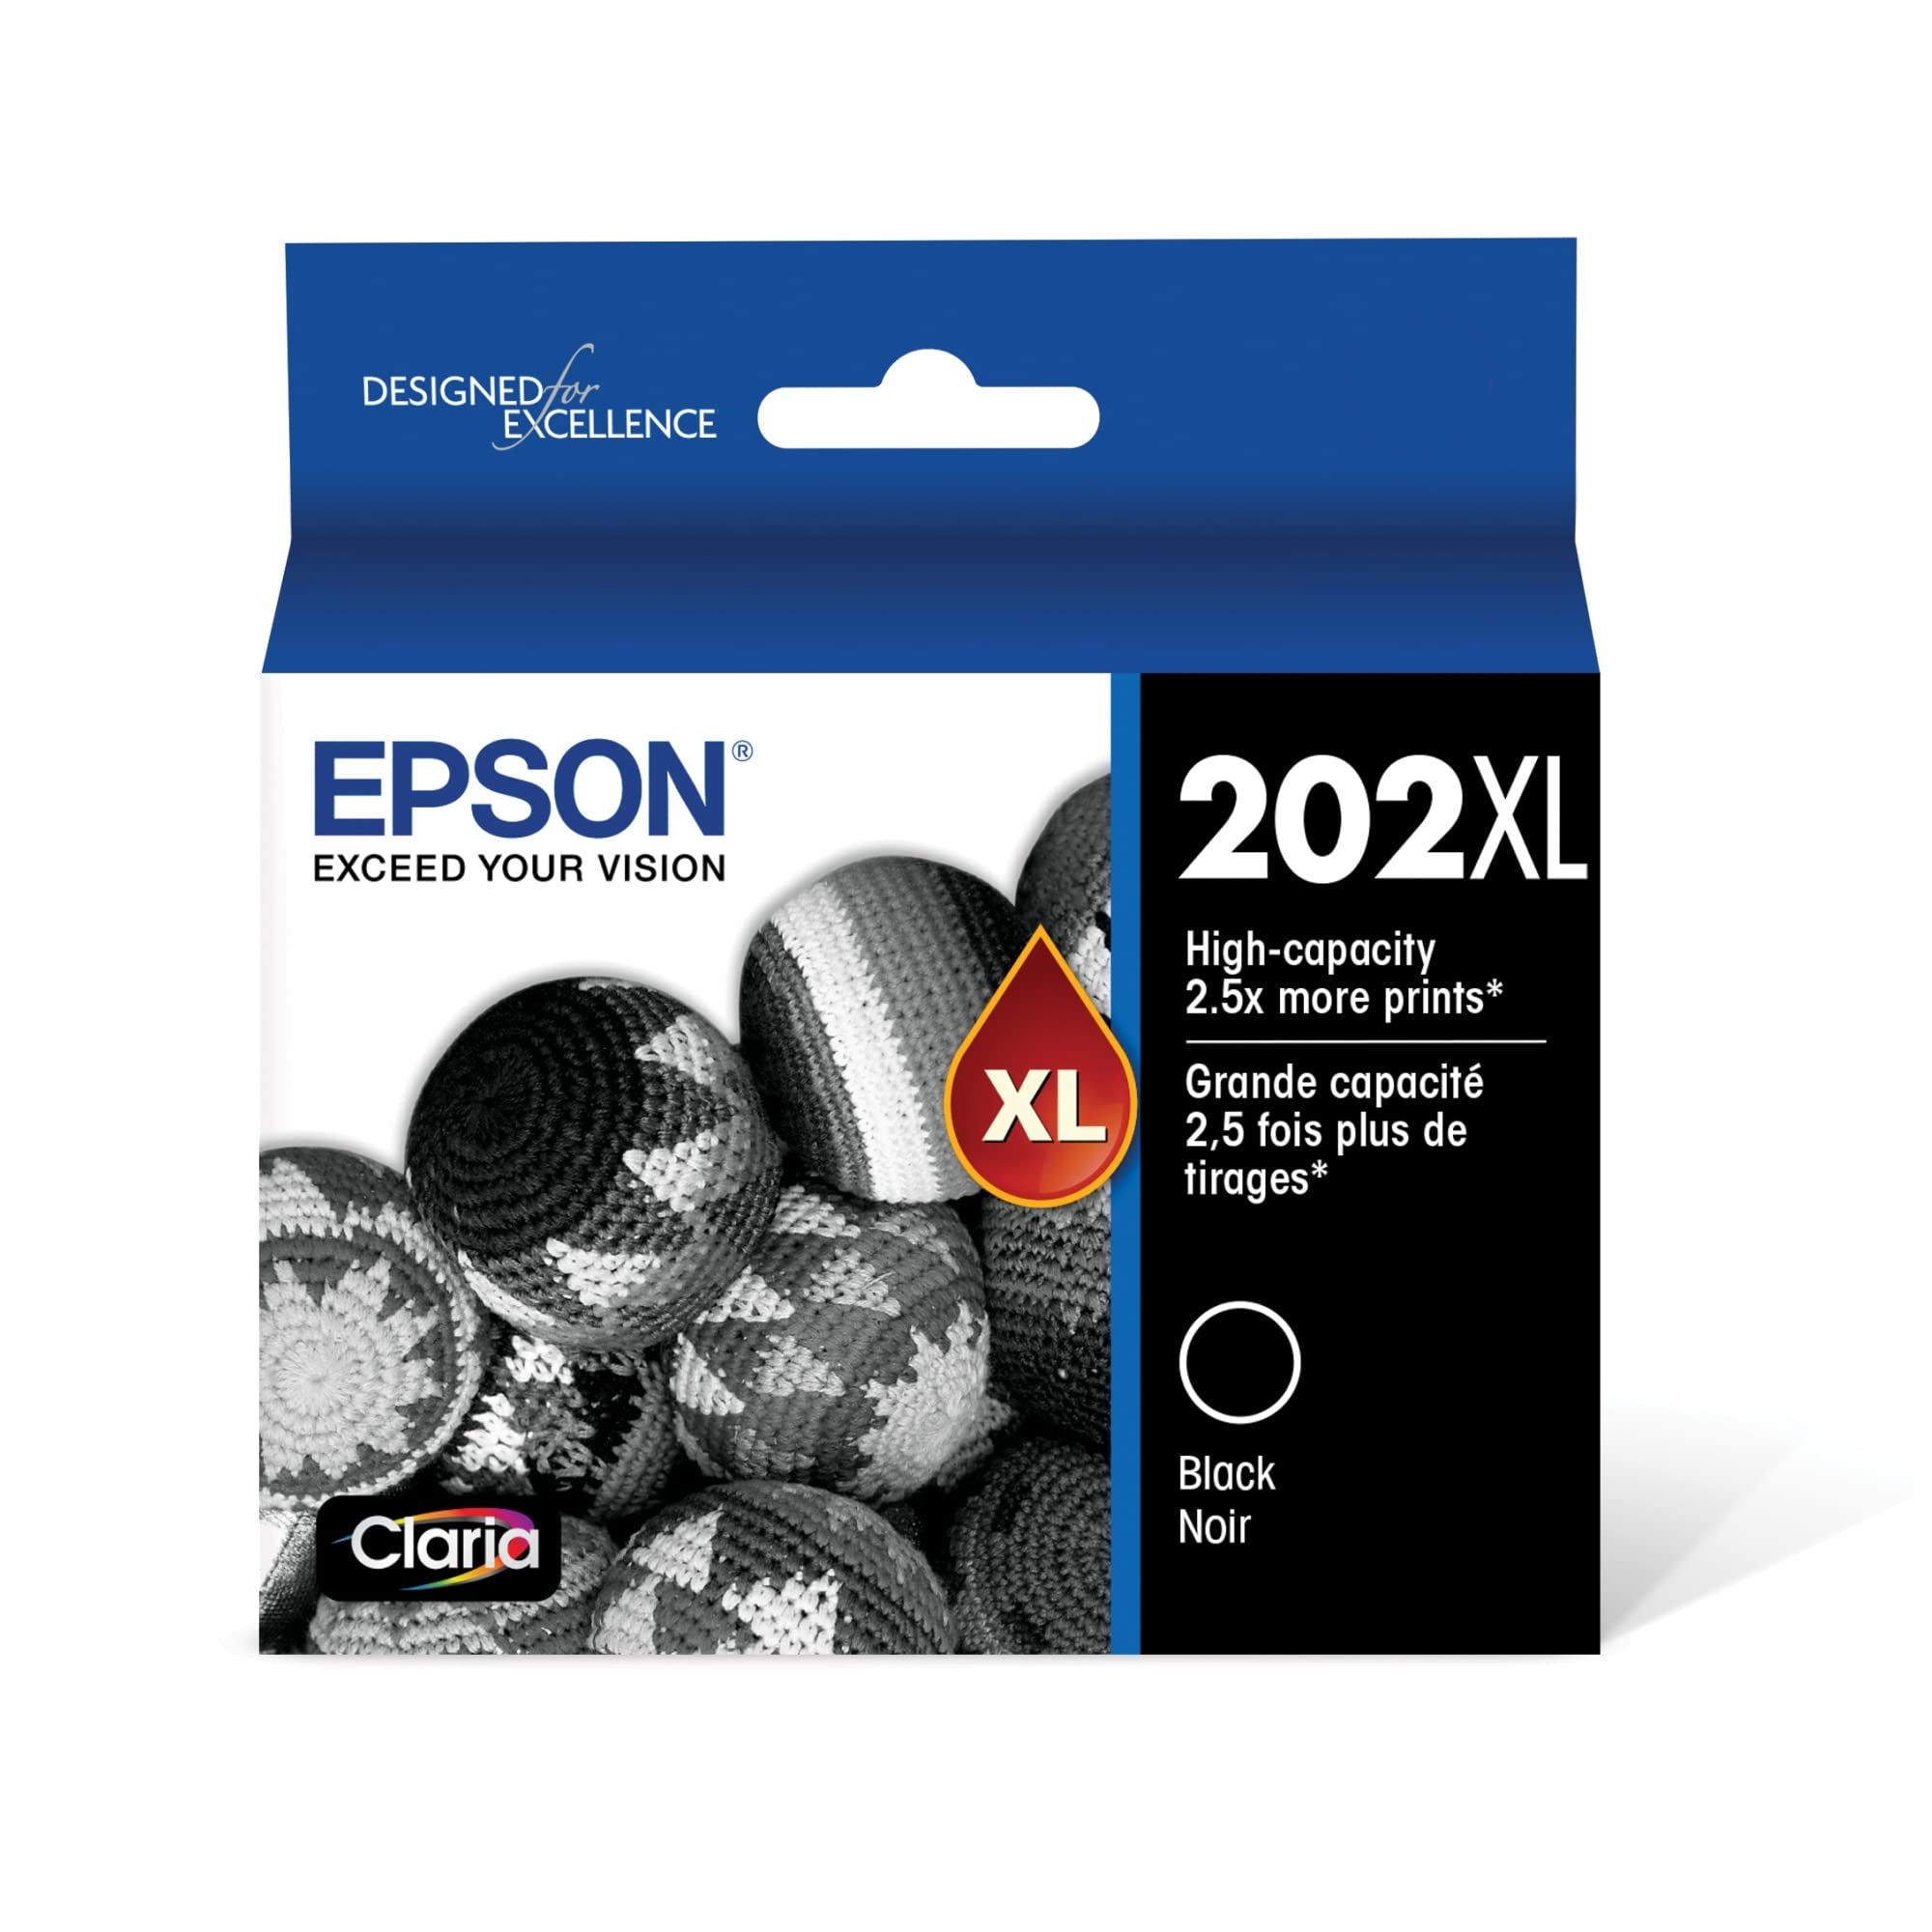 Epson T202XL シアン T202XL220 Claria 大容量インク カートリッジ - シアン インク